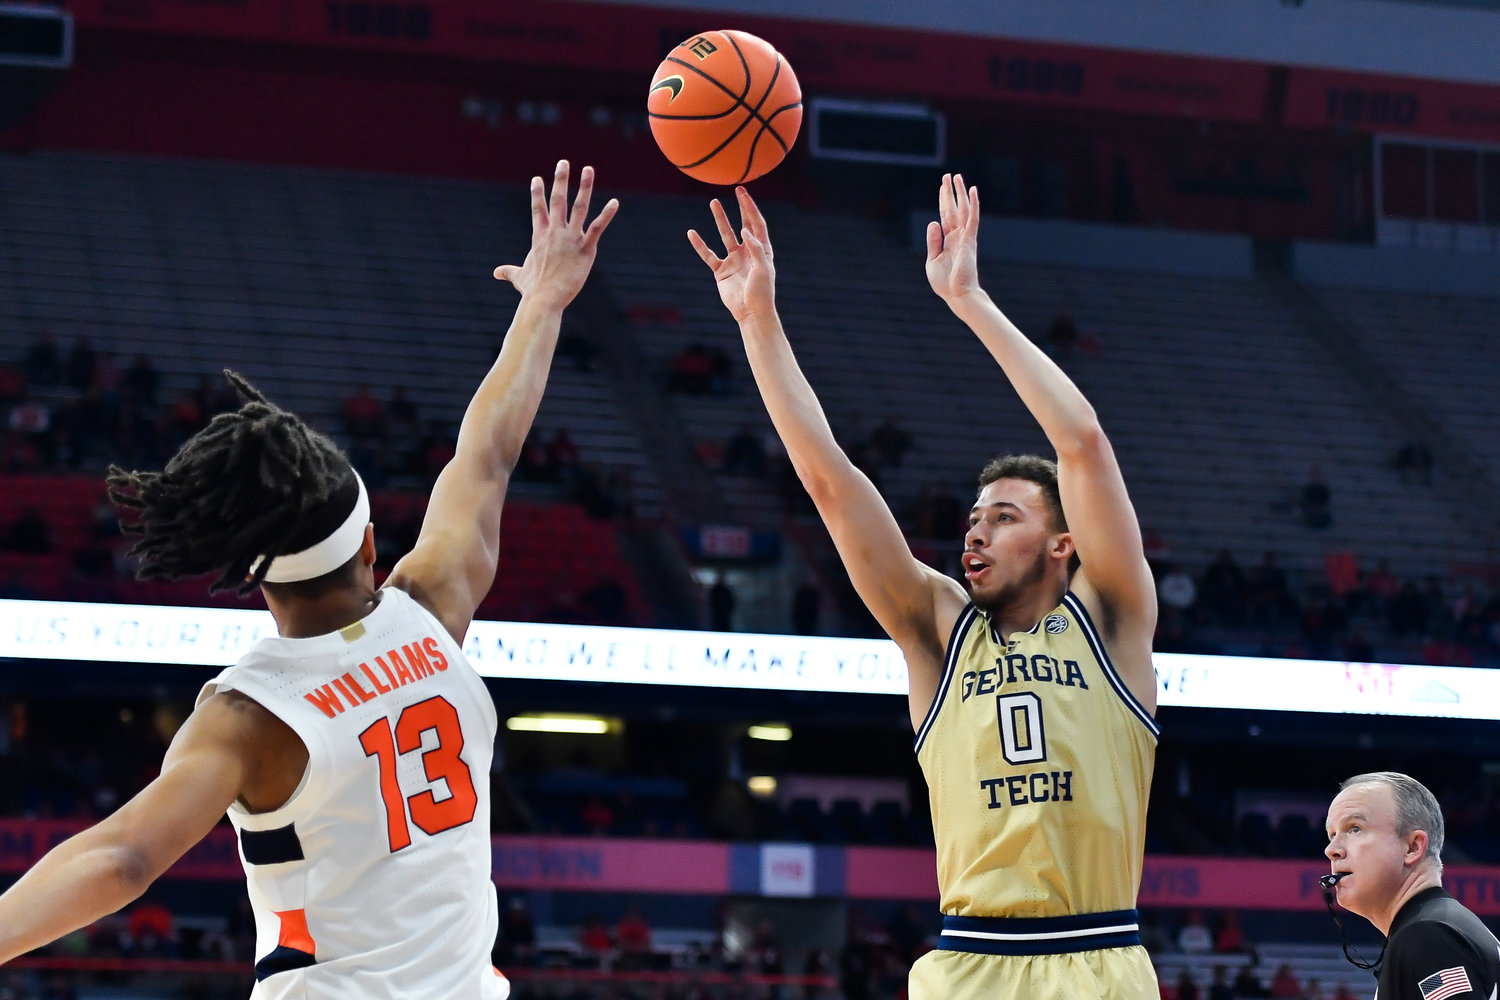 Georgia Tech guard Lance Terry, right, shoots over Syracuse forward Benny Williams during the first half of Tuesday night's game in Syracuse. Terry scored 24 points as the Yellows Jackets won 96-76.